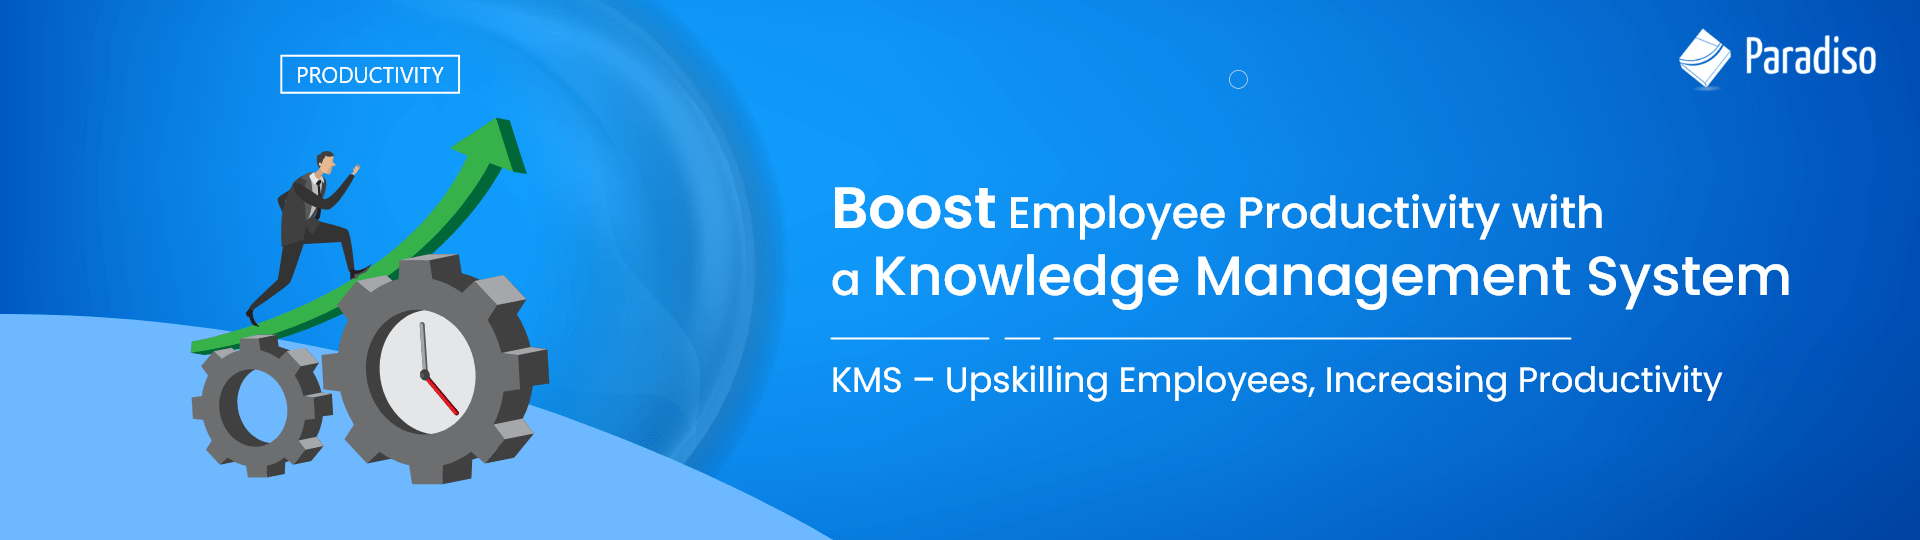 Boost Employee Productivity with a Knowledge Management System